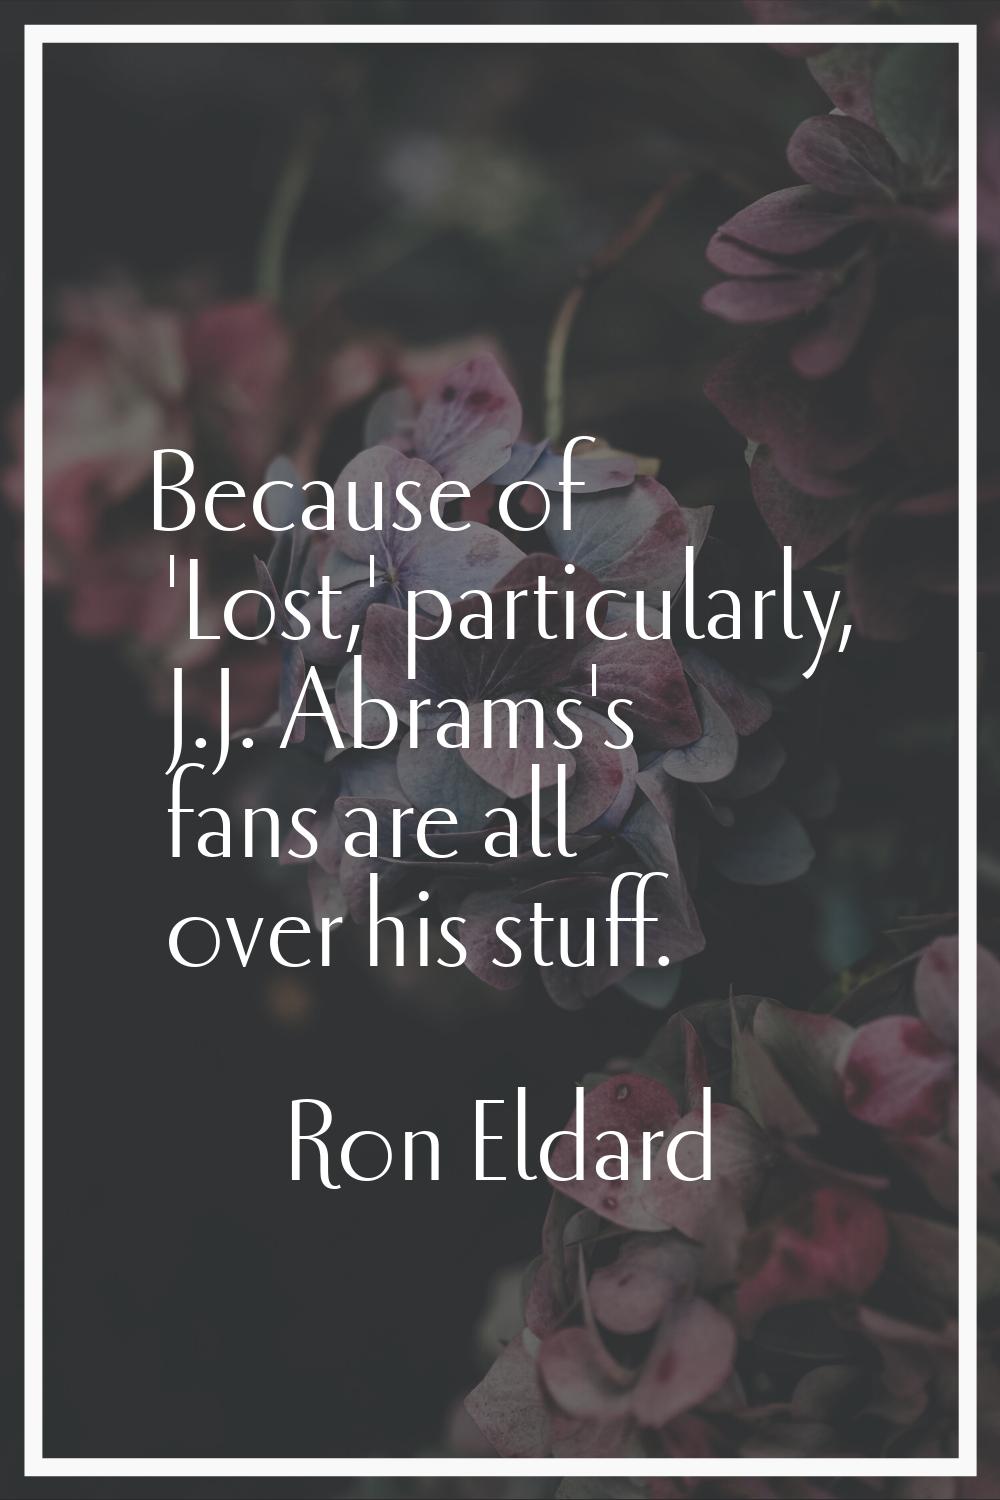 Because of 'Lost,' particularly, J.J. Abrams's fans are all over his stuff.